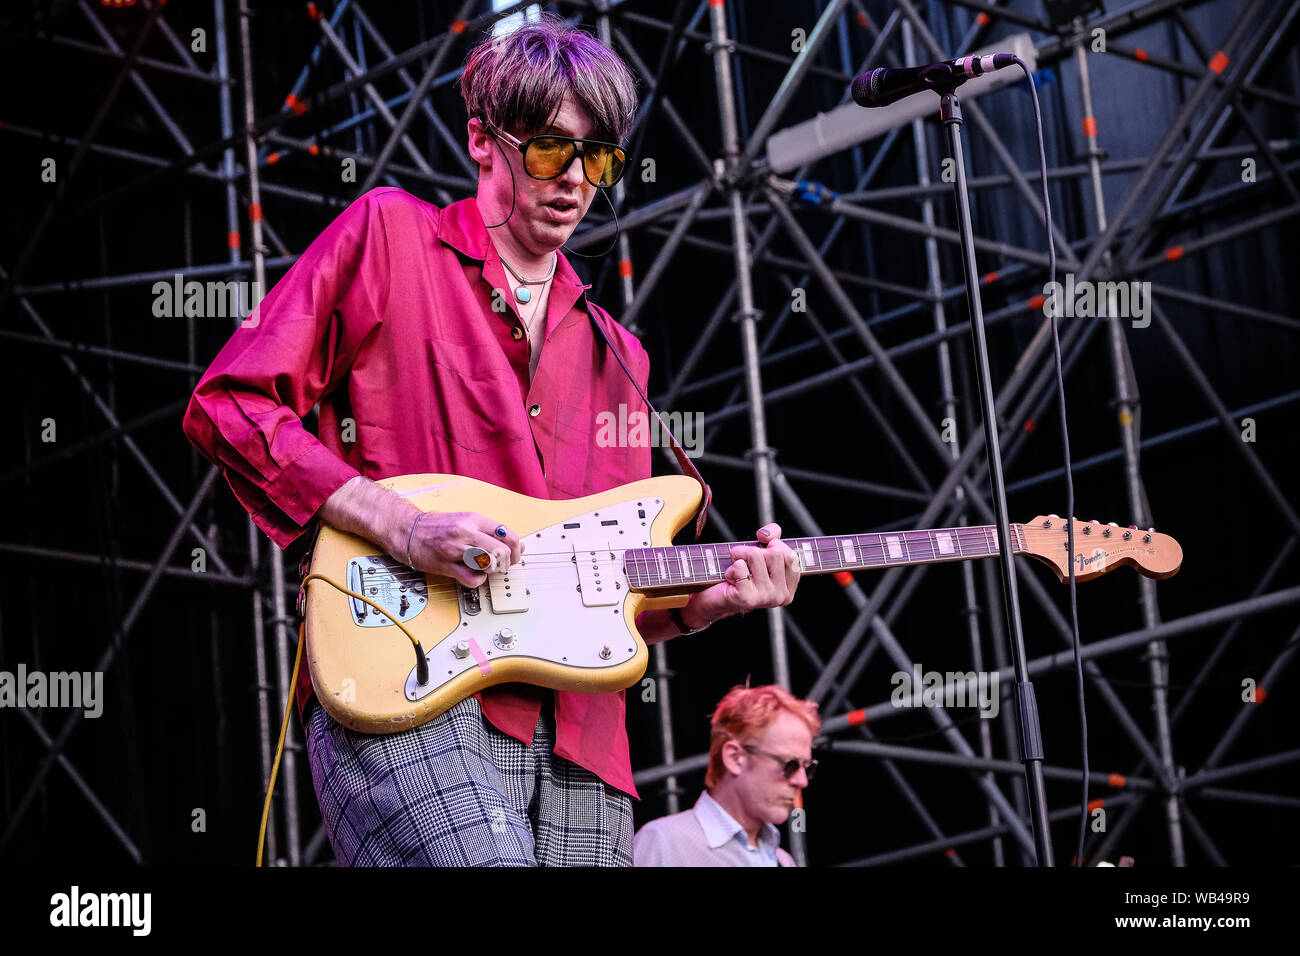 Torino, Italy. 23rd Aug, 2019. Deerhunter on stage at the 5th edition of the 'Todays Festival 2019'. (Photo by Bruno Brizzi/Pacific Press) Credit: Pacific Press Agency/Alamy Live News Stock Photo